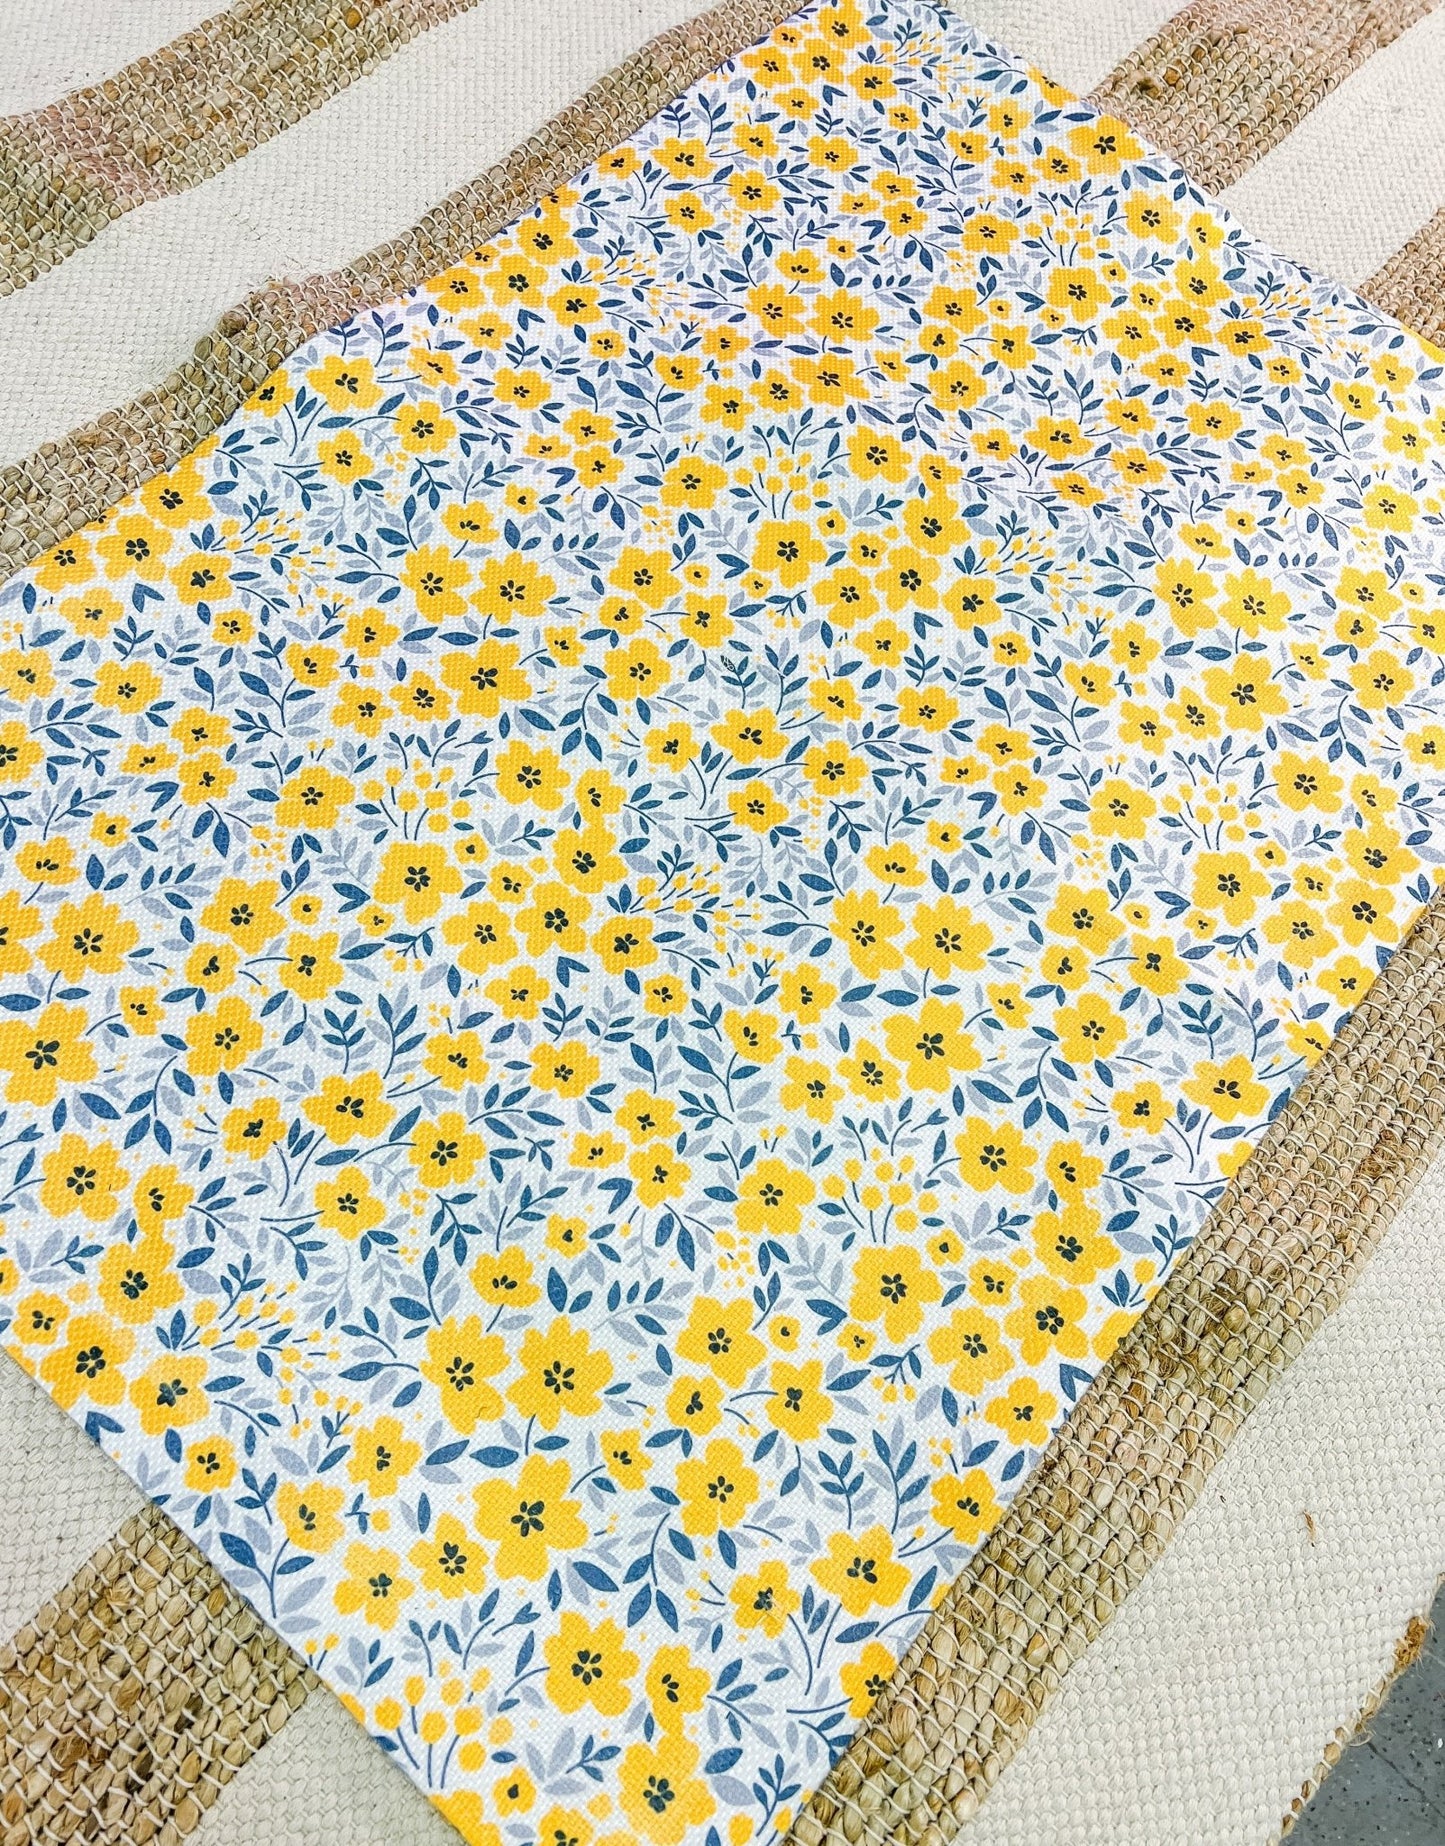 Yellow and Blue Flowers - Miss Molly Designs, LLC